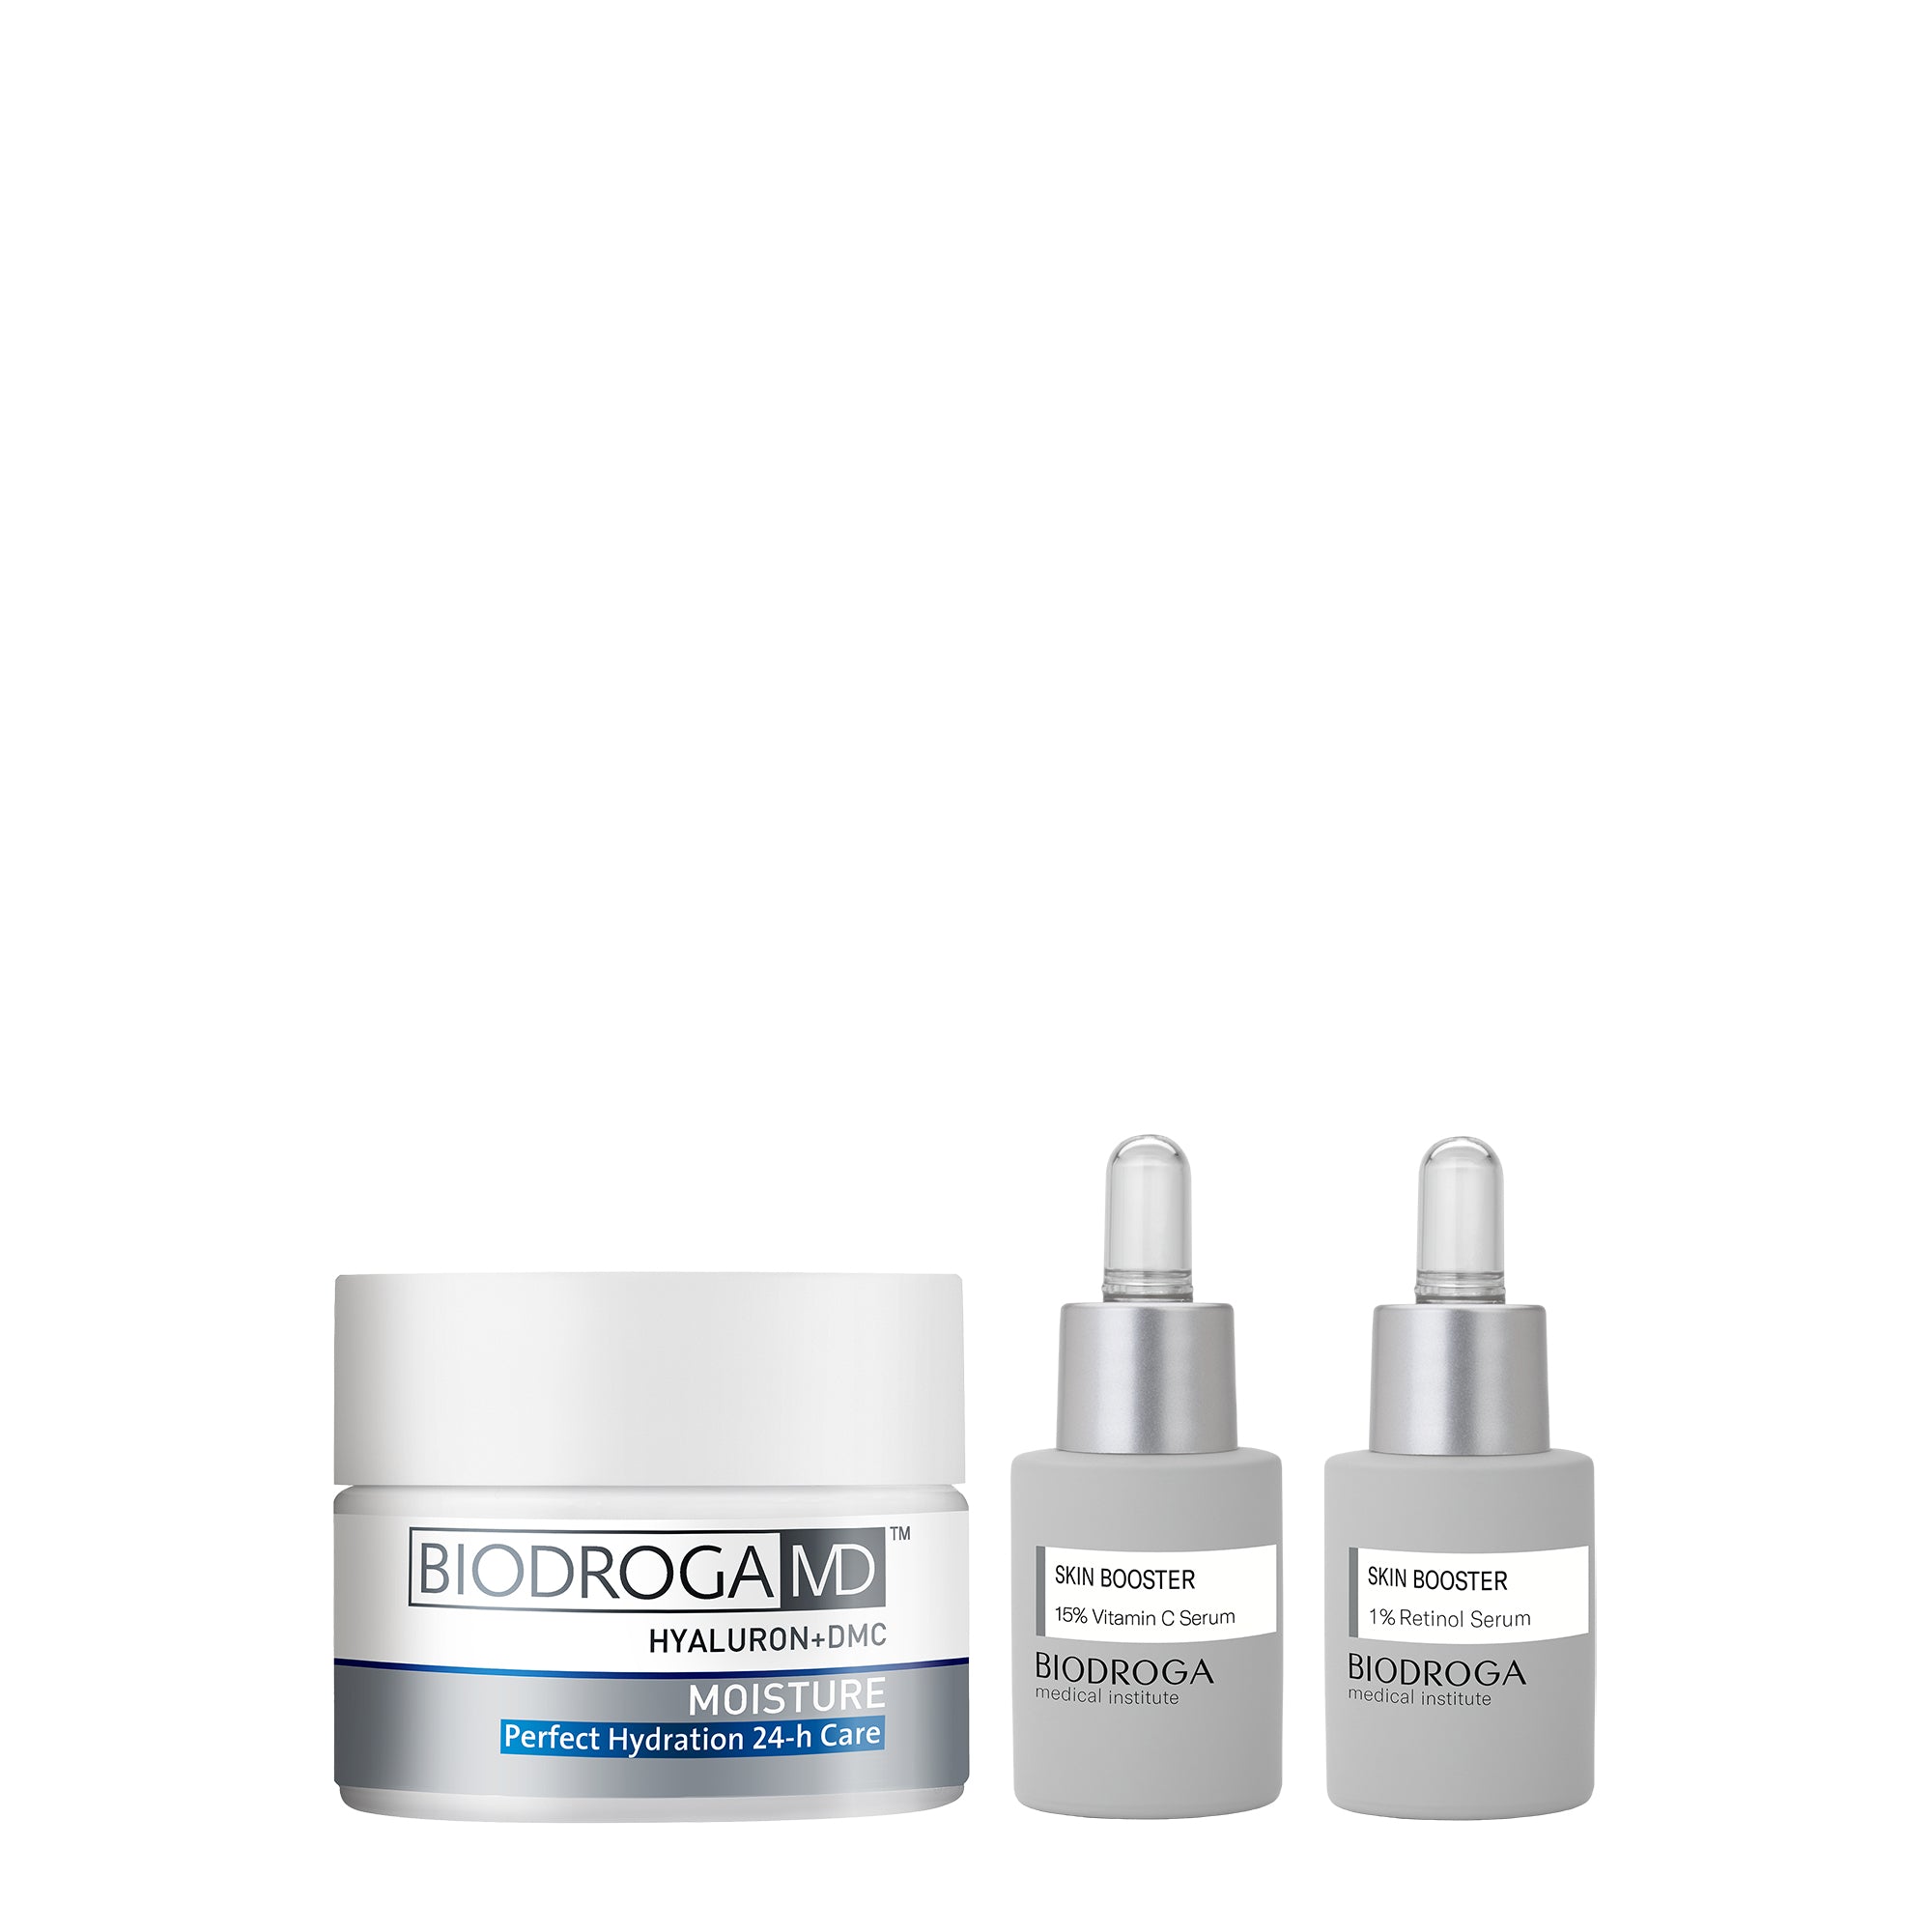 The Brighten My Day - Normal - Skin Care Kit